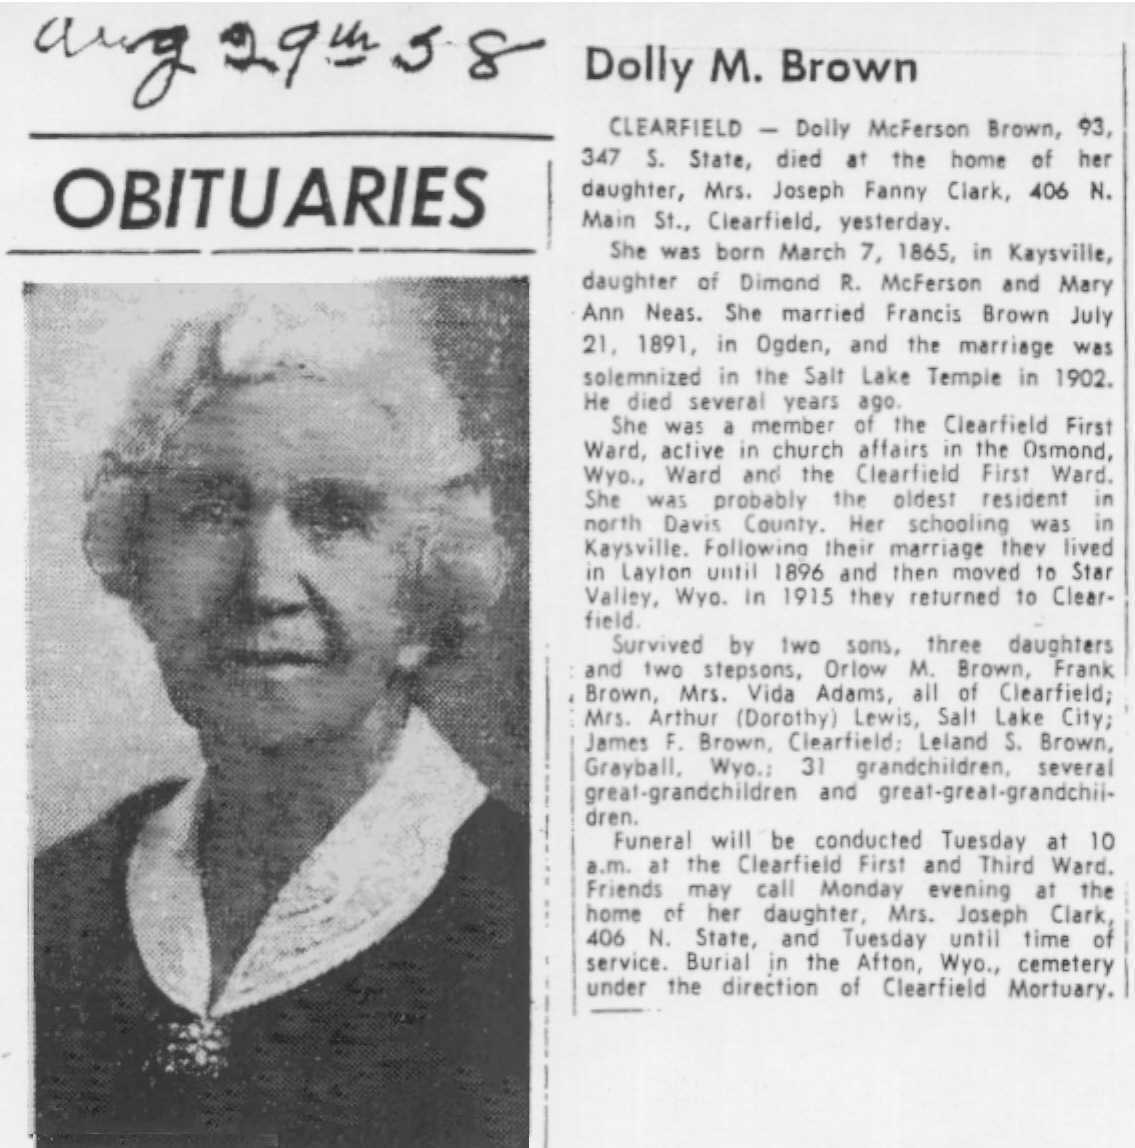 Dolly McFerson Brown 1958 Obituary